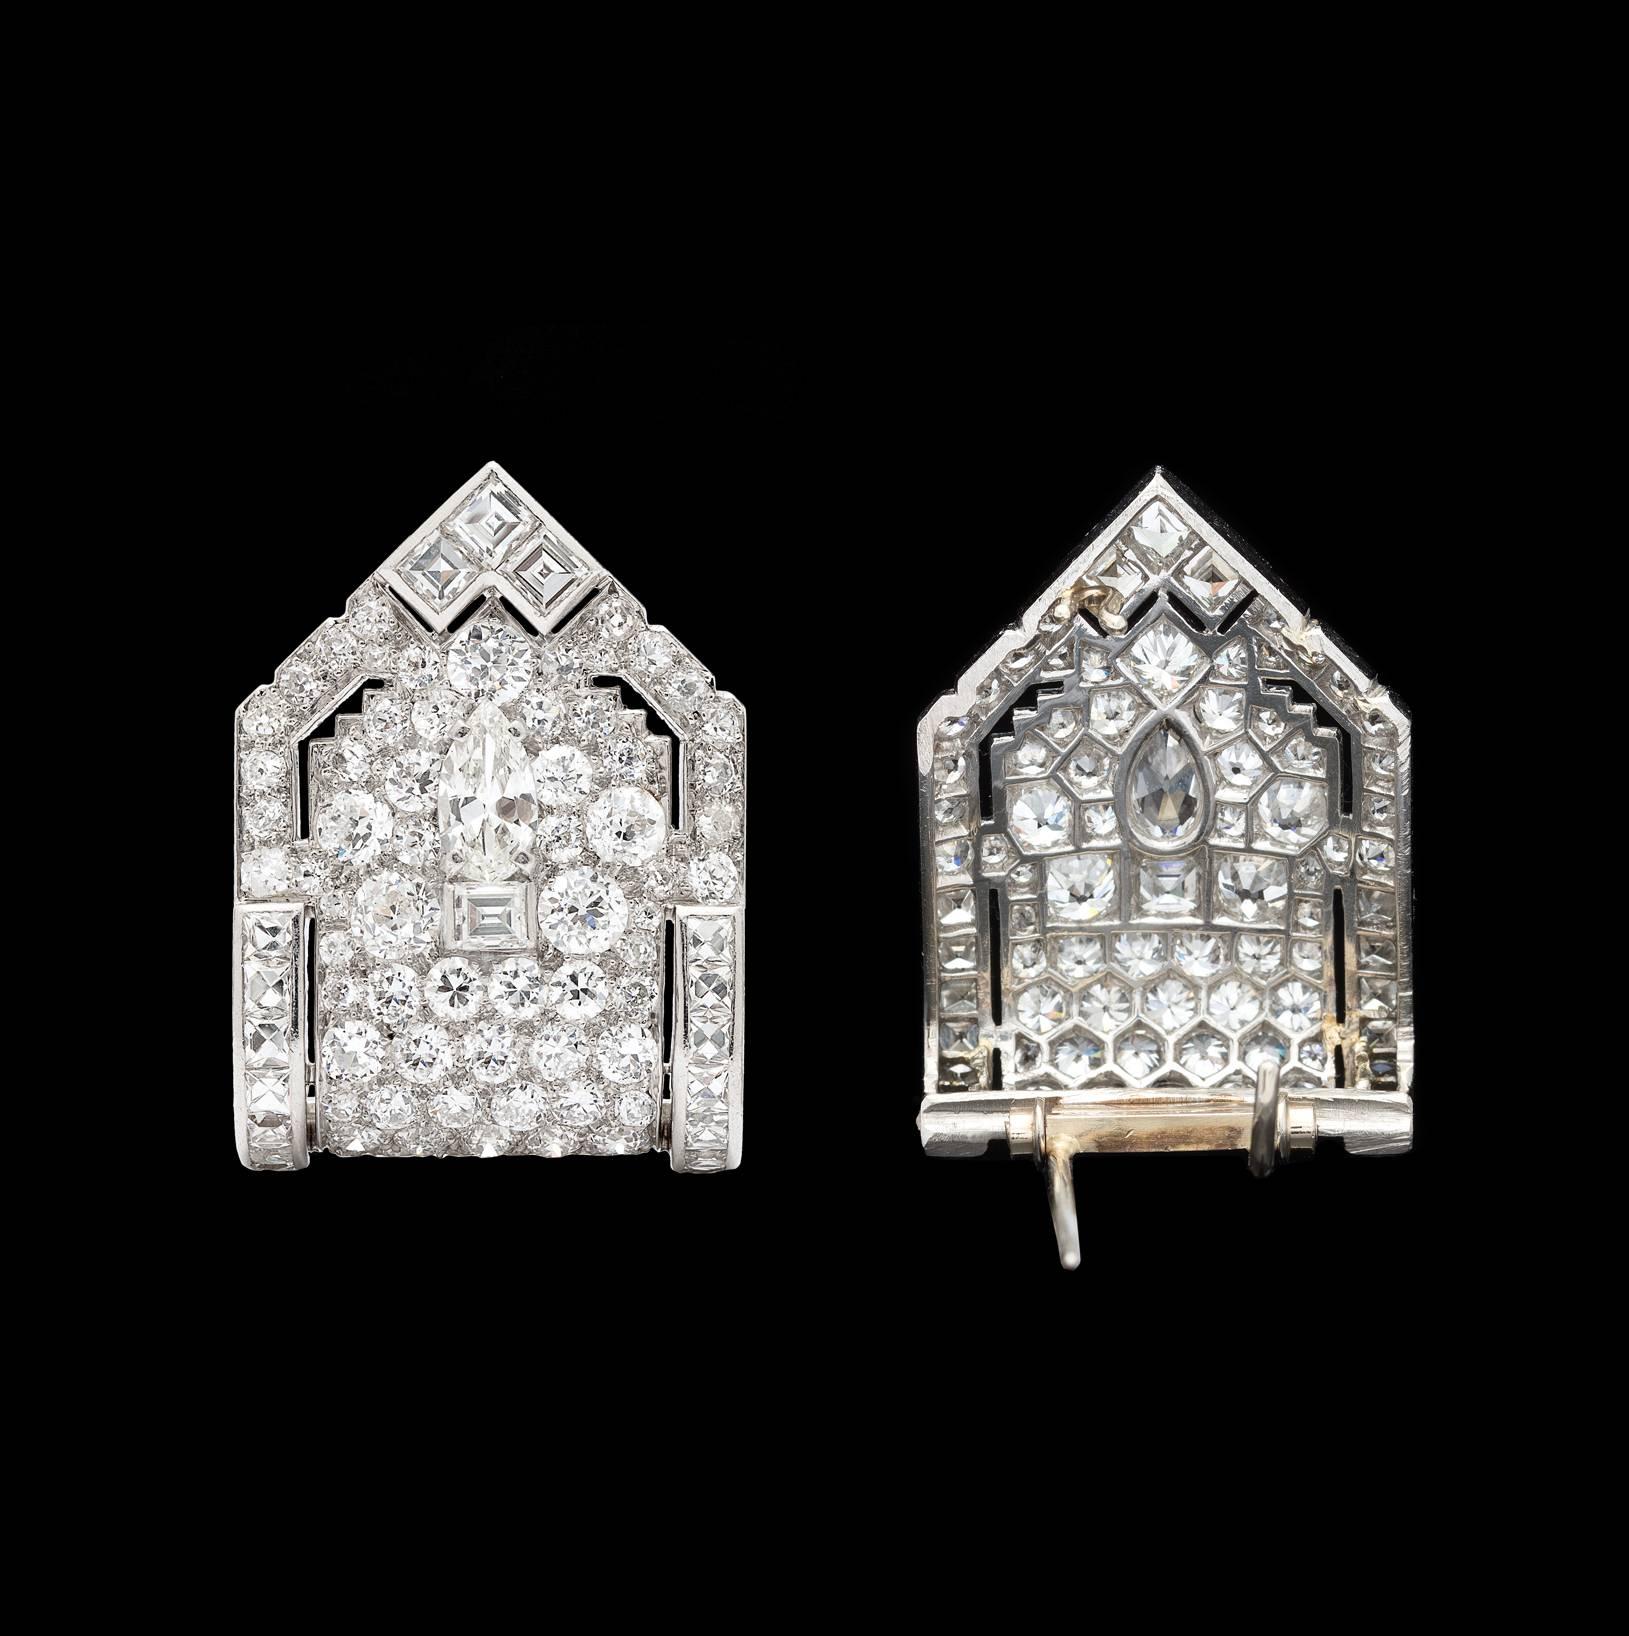 A gorgeous pair of platinum art deco shield-shaped dress clips, set with 160 European, pear, old mine, French, and square-cut diamonds. The estimated total diamond weight is 10.40cts., with an overall quality of G-H-I color and VS-SI clarity. They